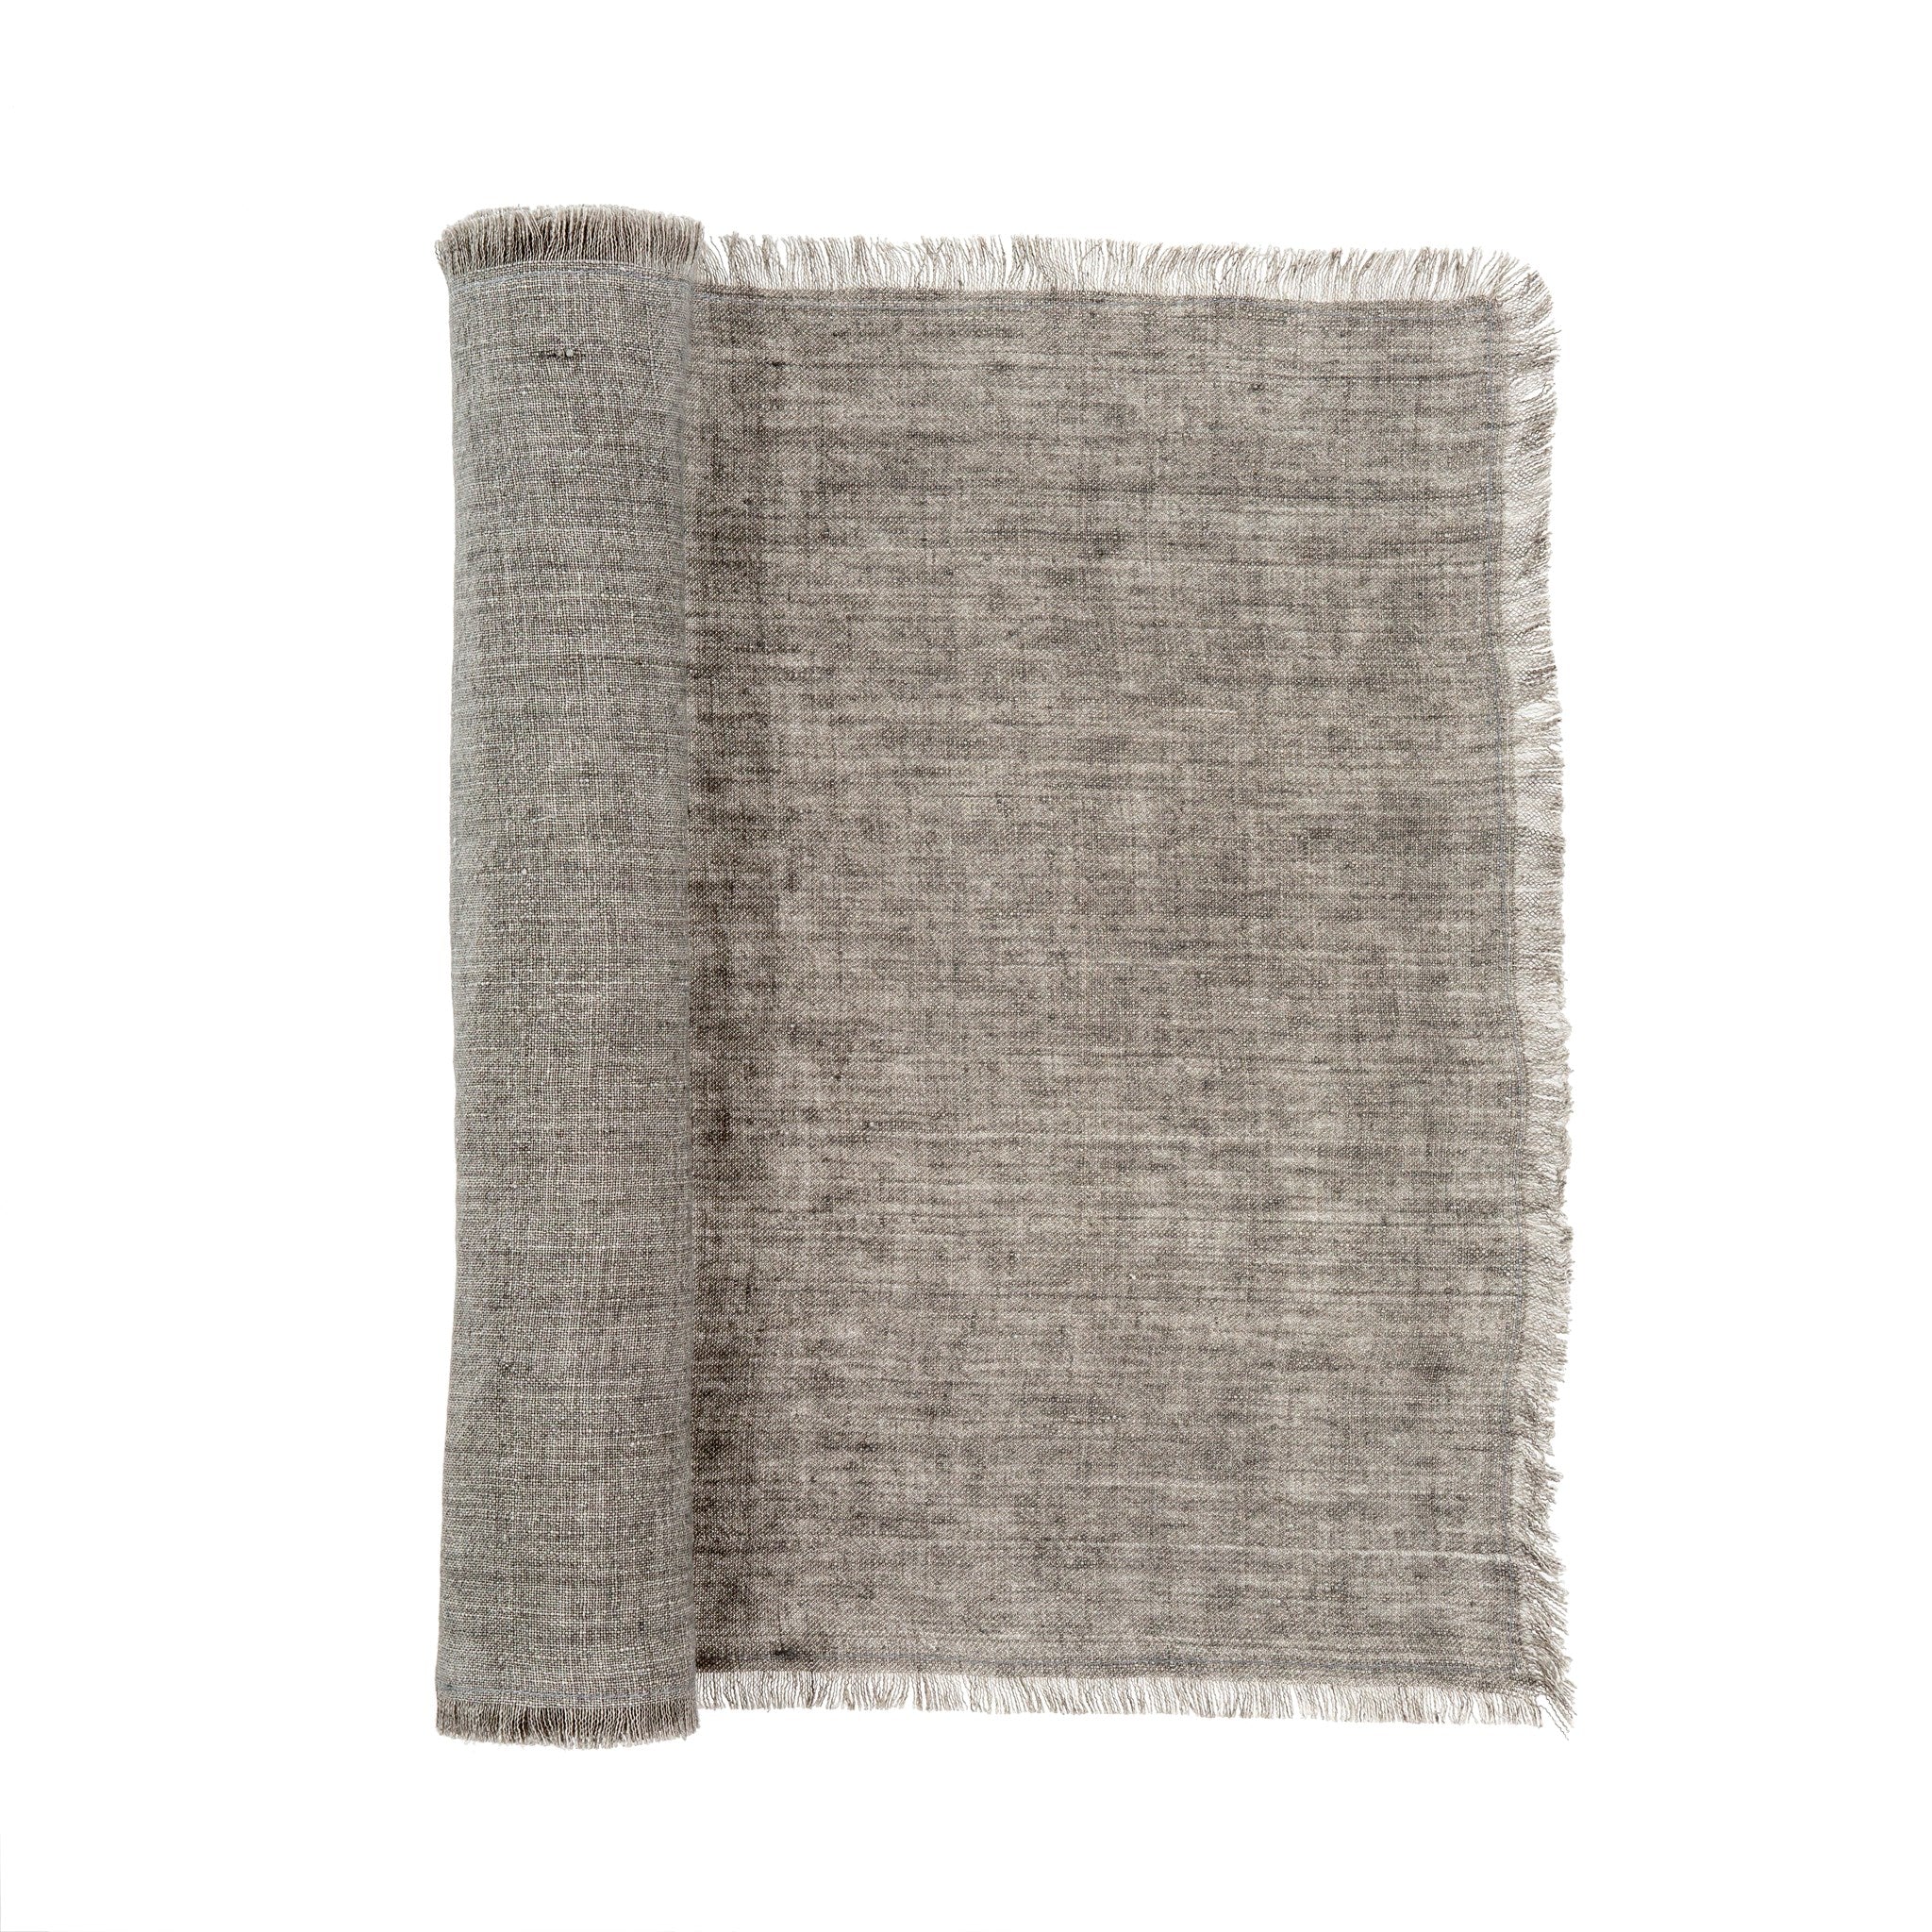 Lina Linen Runners- 4 Colors